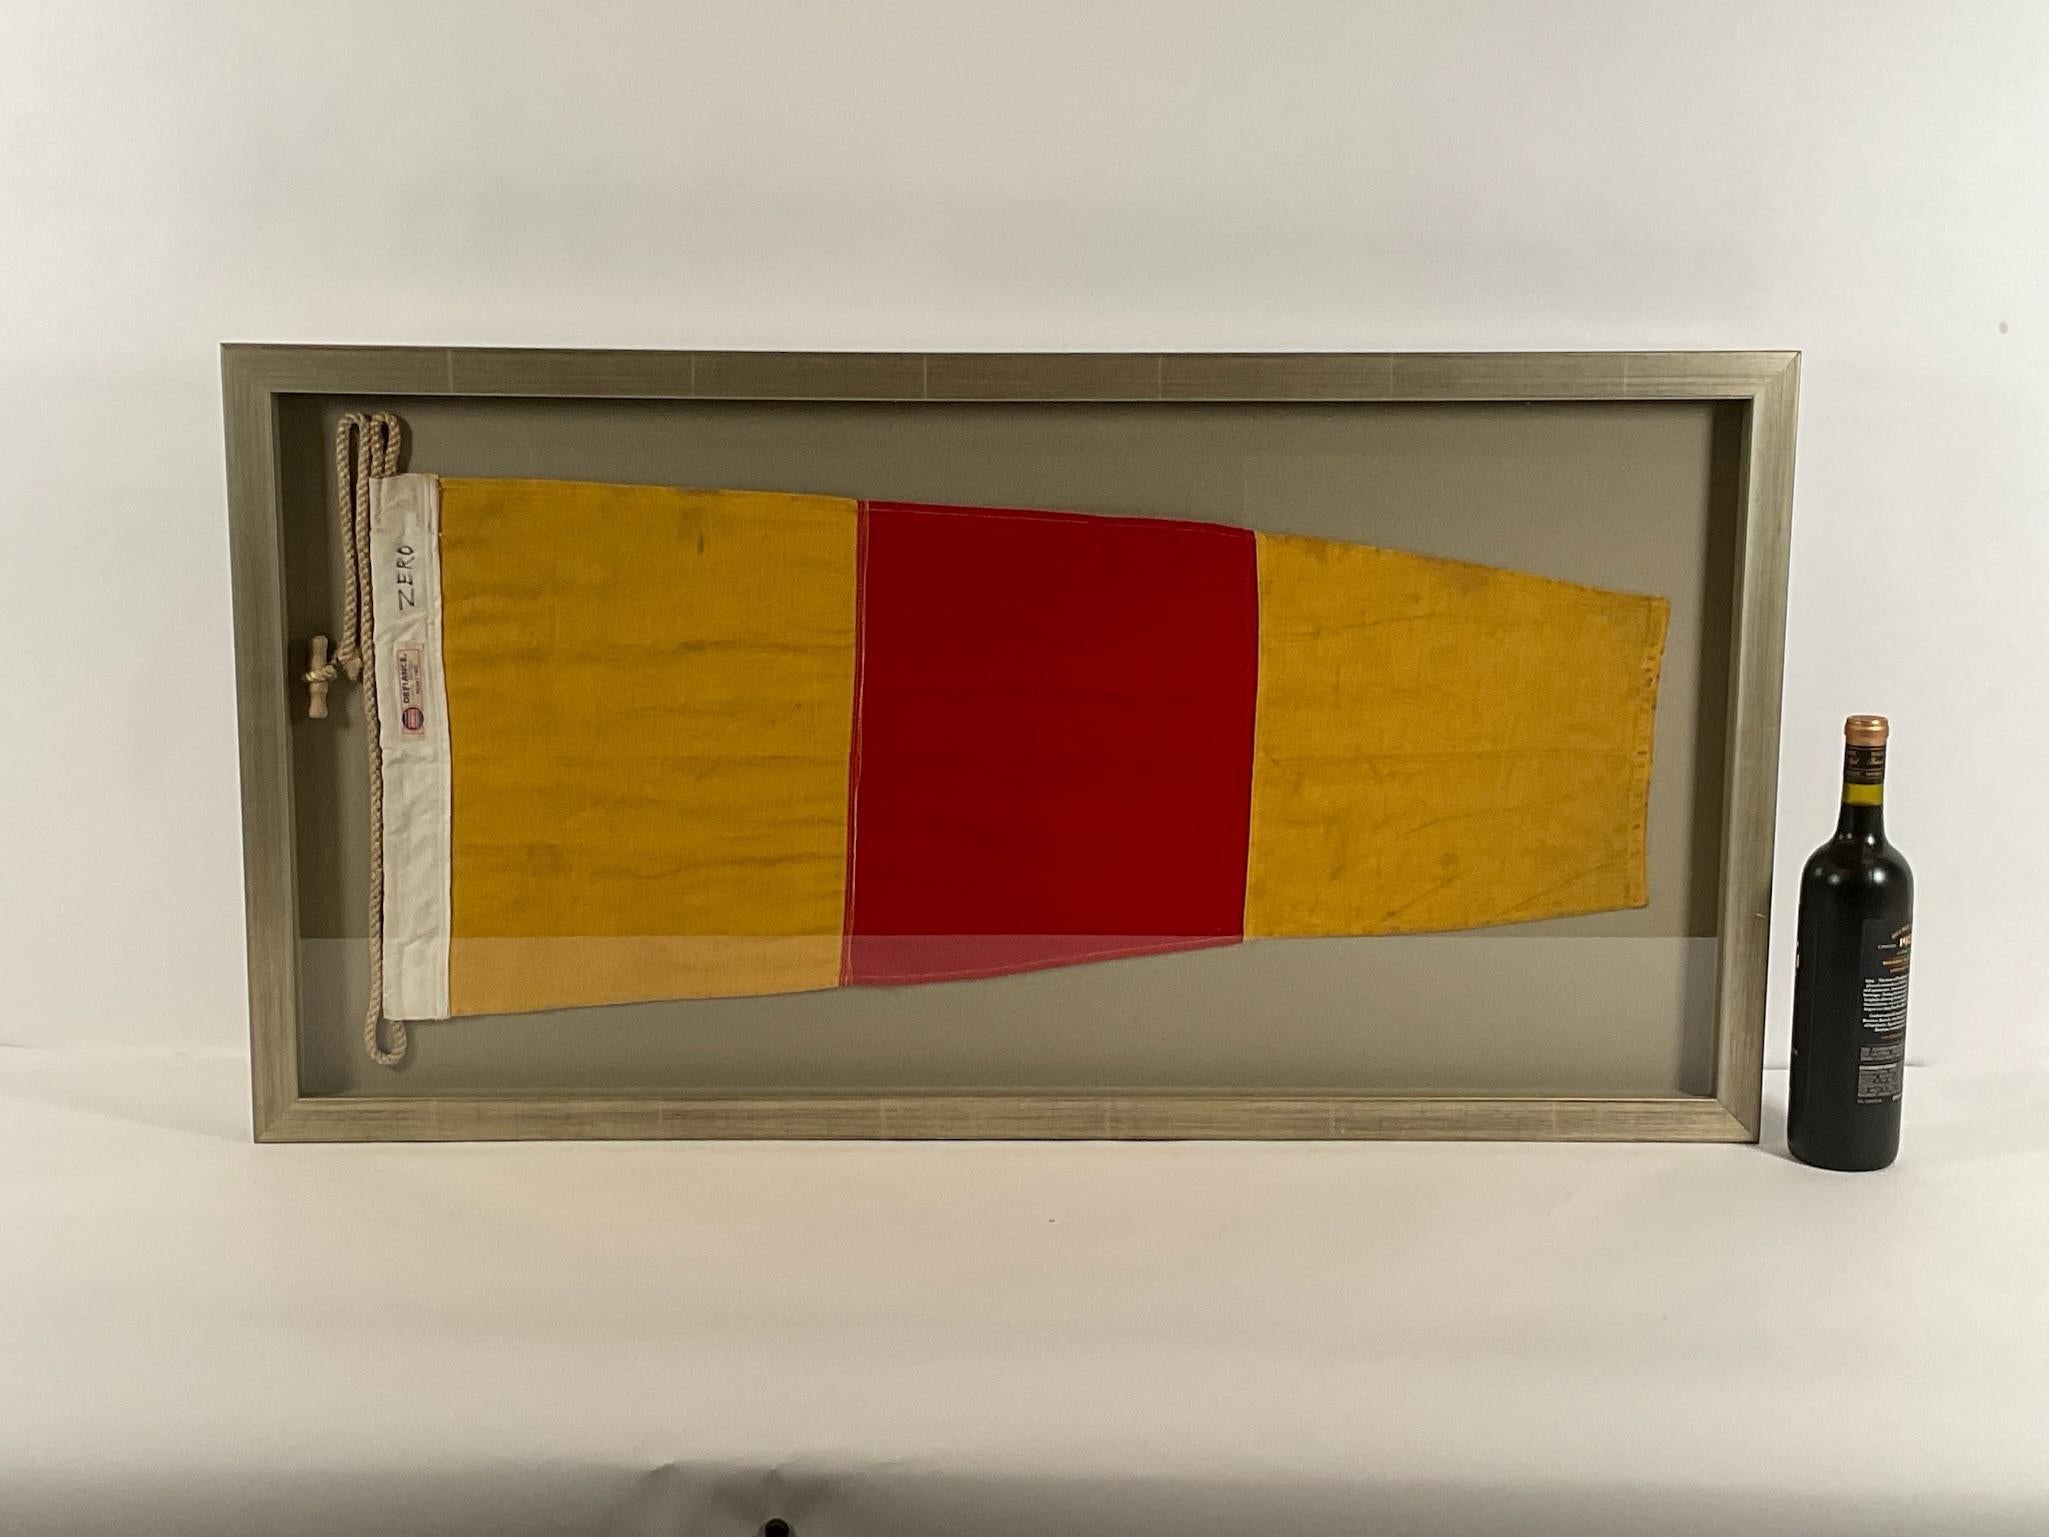 North American Large Nautical Signal Flag in Frame For Sale